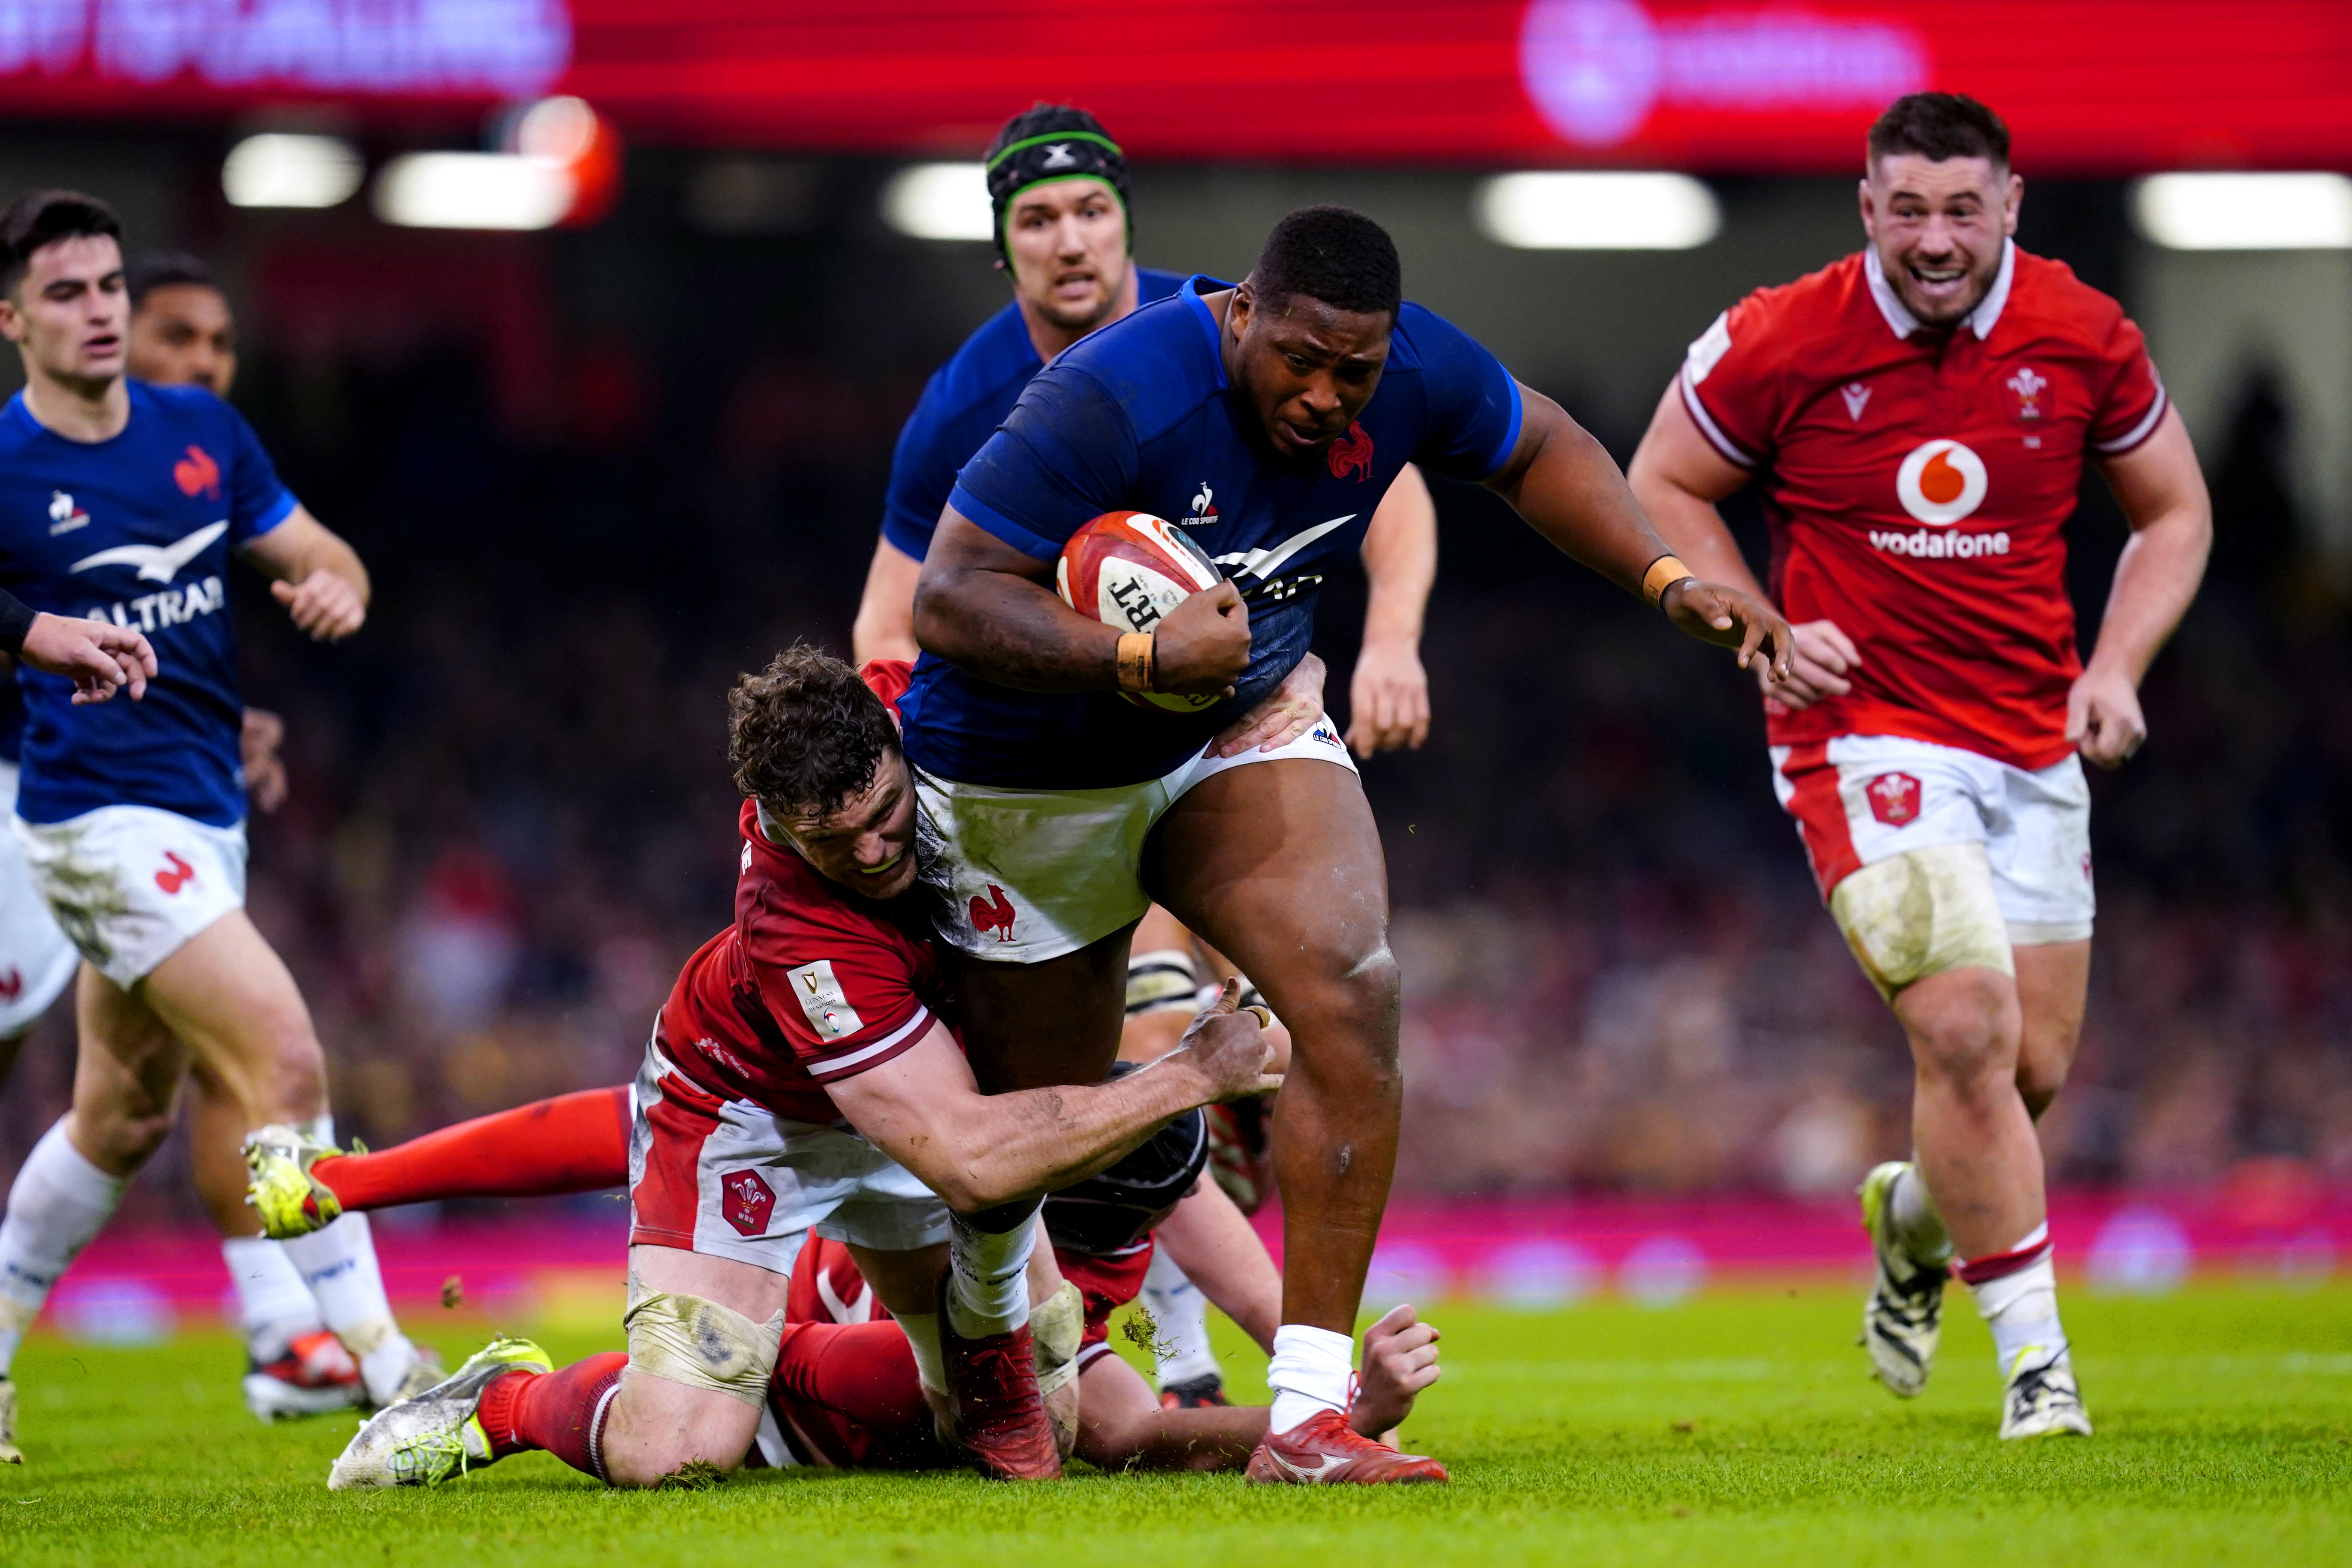 French power won the day against Wales